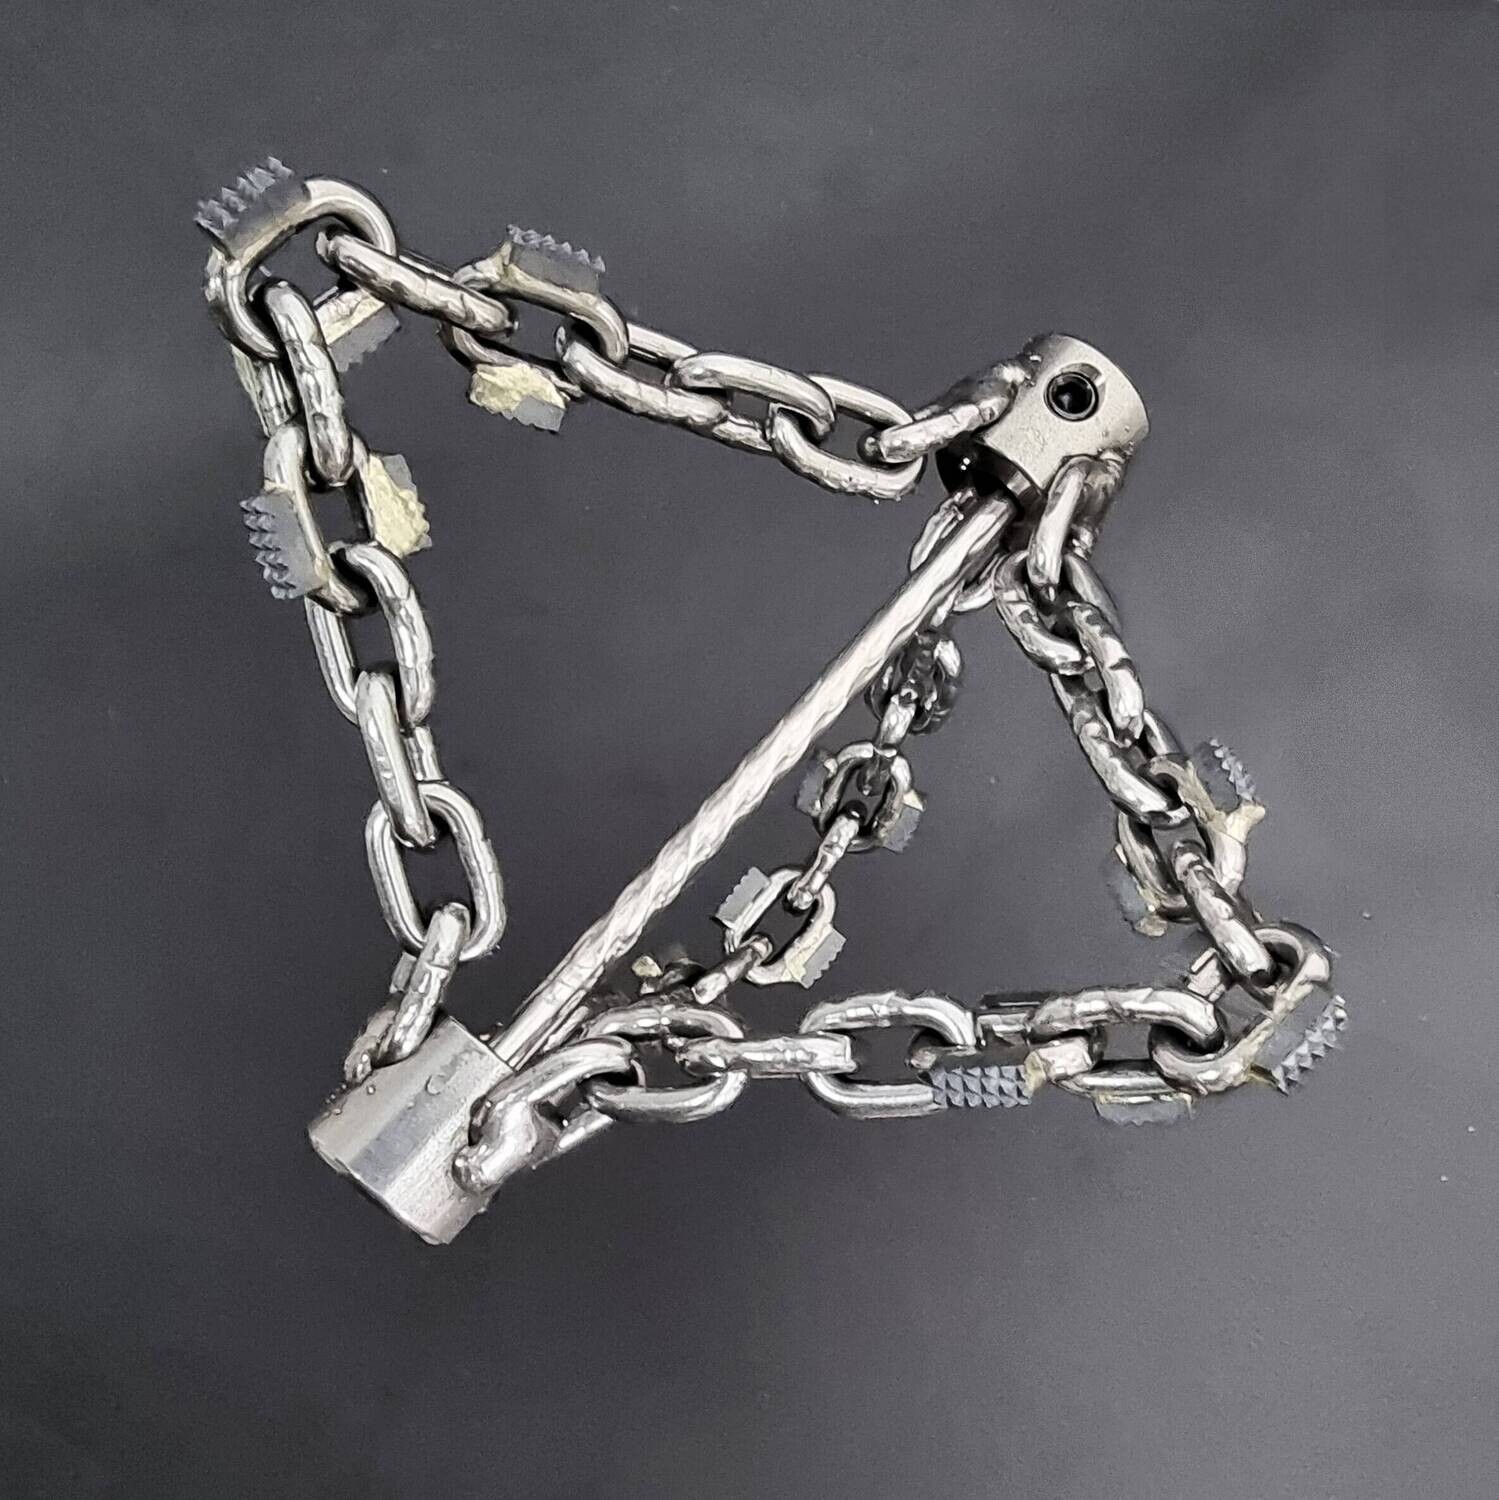 Croco Chain (Cast Iron & Clay Pipes) is a drain chain used with a toilet snake flexshaft or auger for removing solid blockages, turbeculation or limescale in sewer pipes